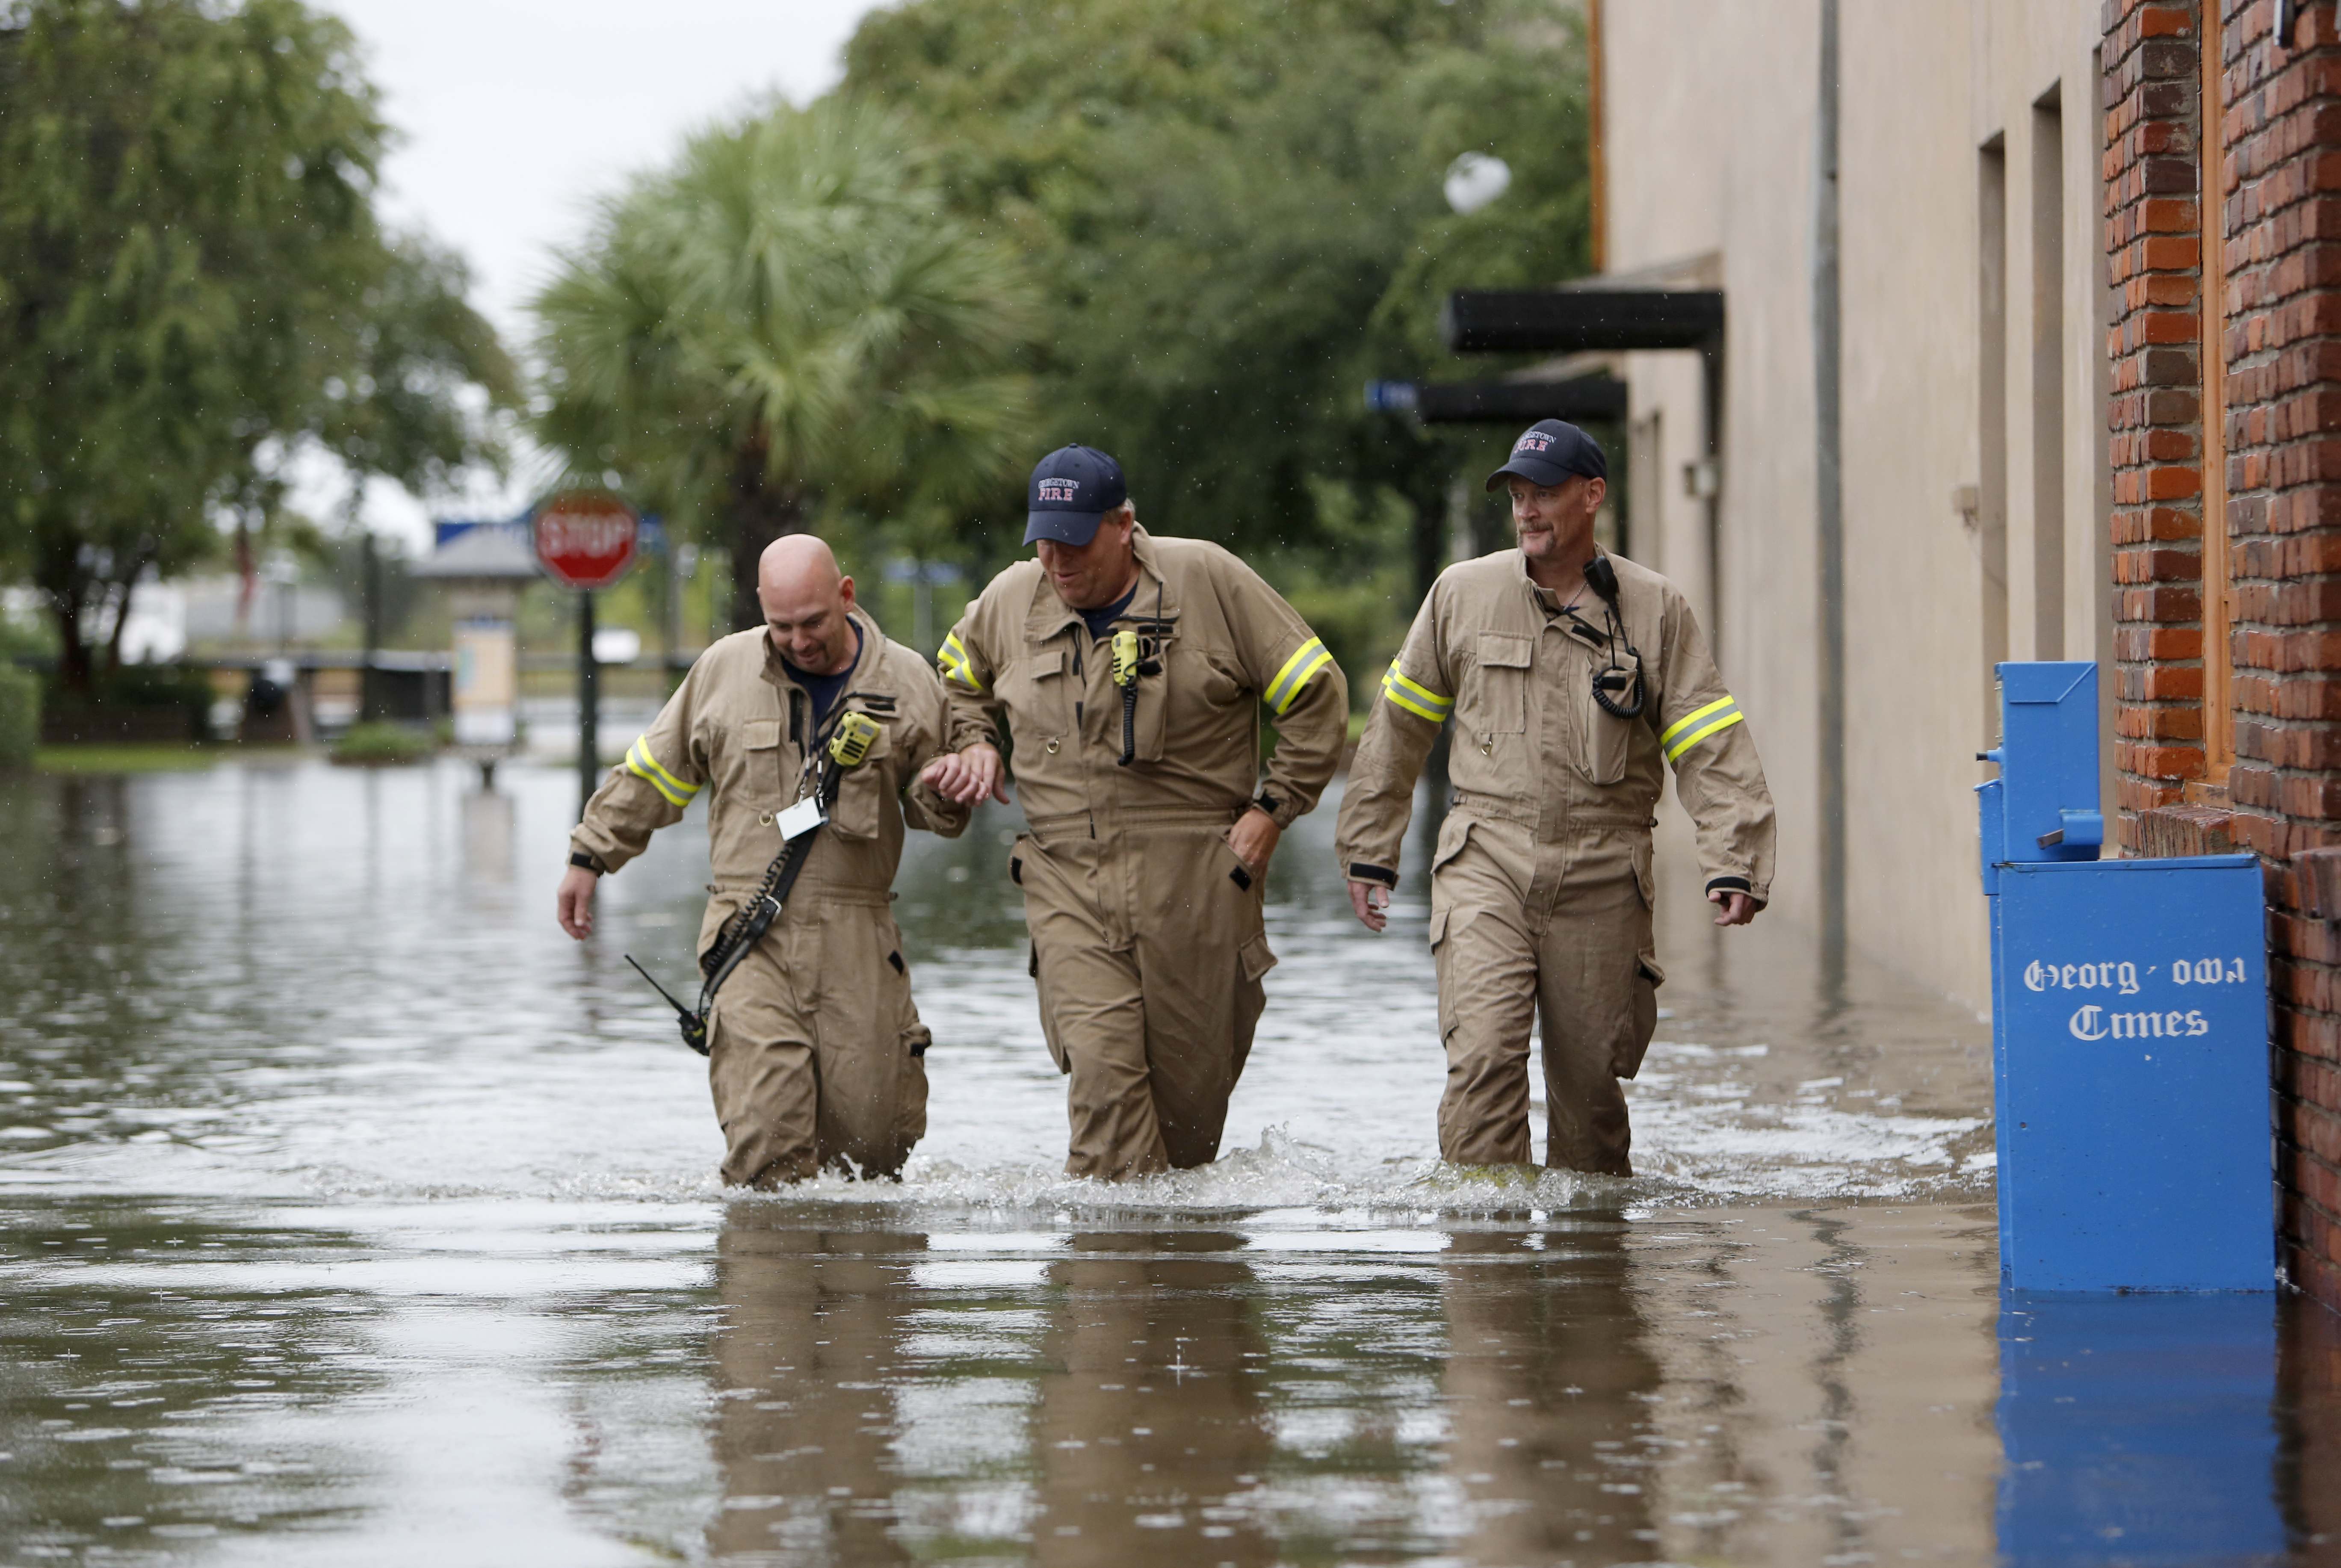 Firemen, from left to right, Norman Beauregard, Kevin Ettenger and Chris Rodgers with the Georgetown Fire Department, inspect the flood waters at high tide in the historic downtown in Georgetown, S.C., Sunday, Oct. 4